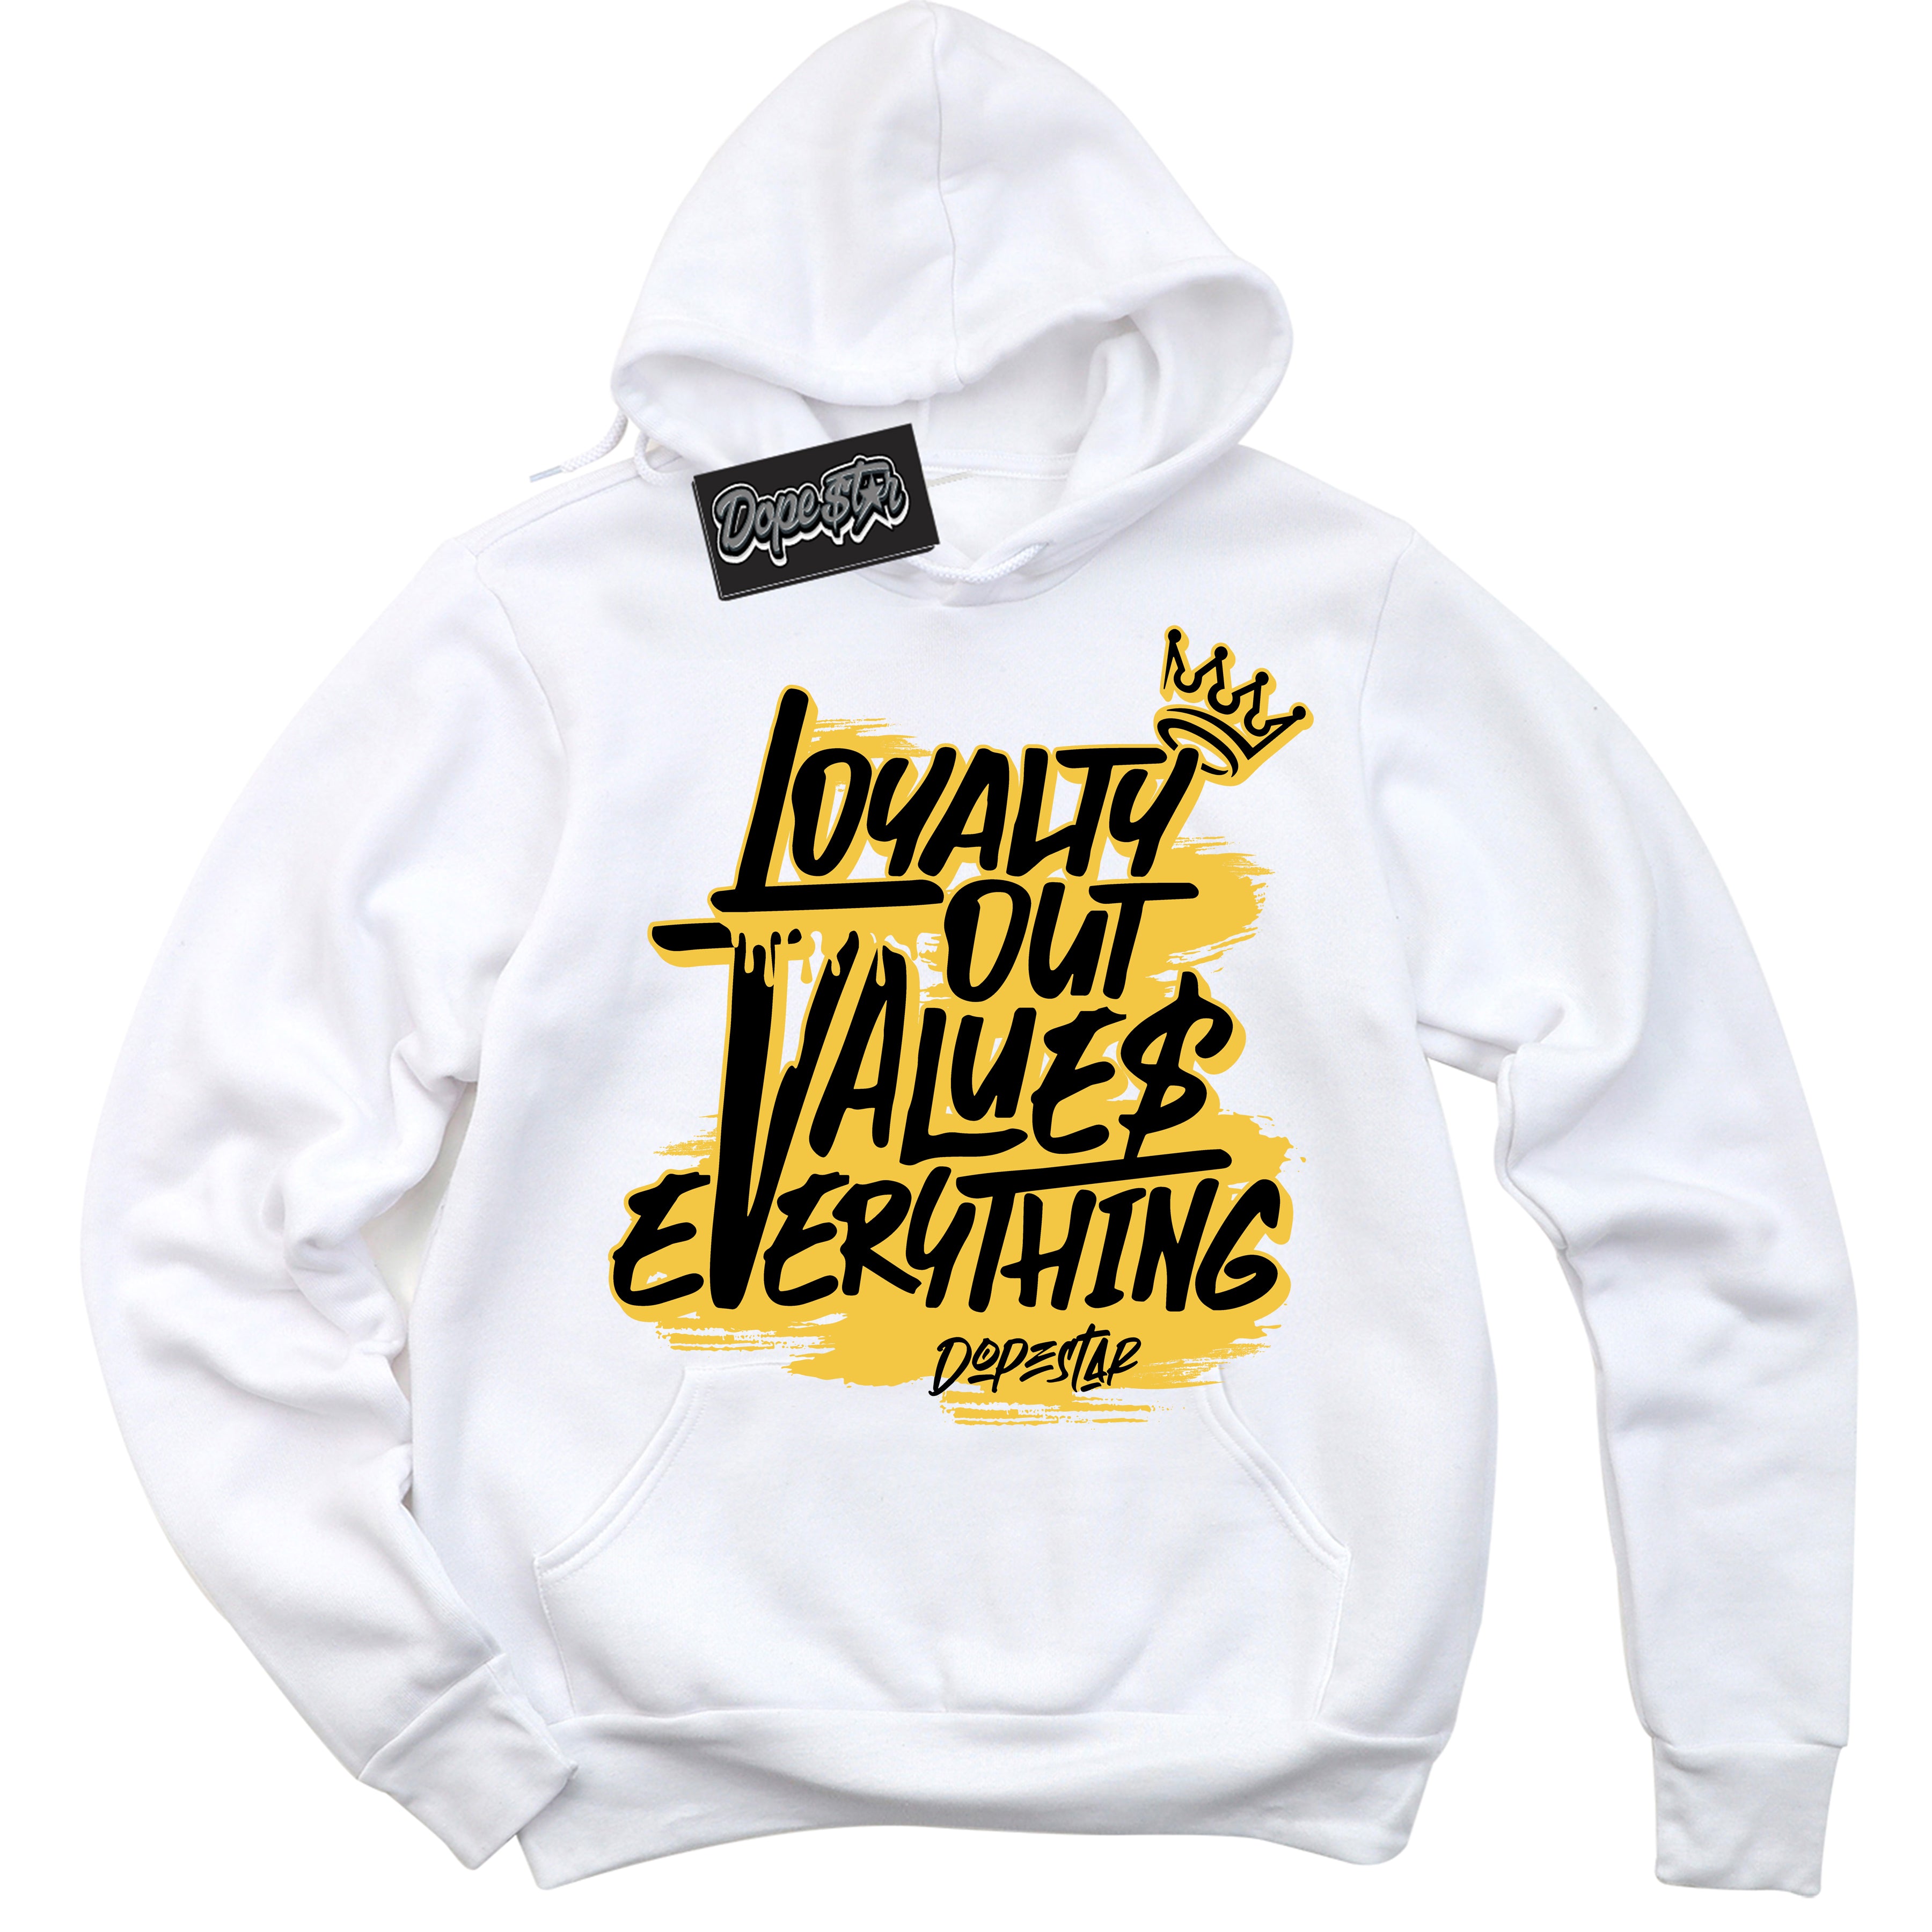 Cool White Hoodie with “ Loyalty Out Values Everything ”  design that Perfectly Matches Thunder 4s Sneakers.